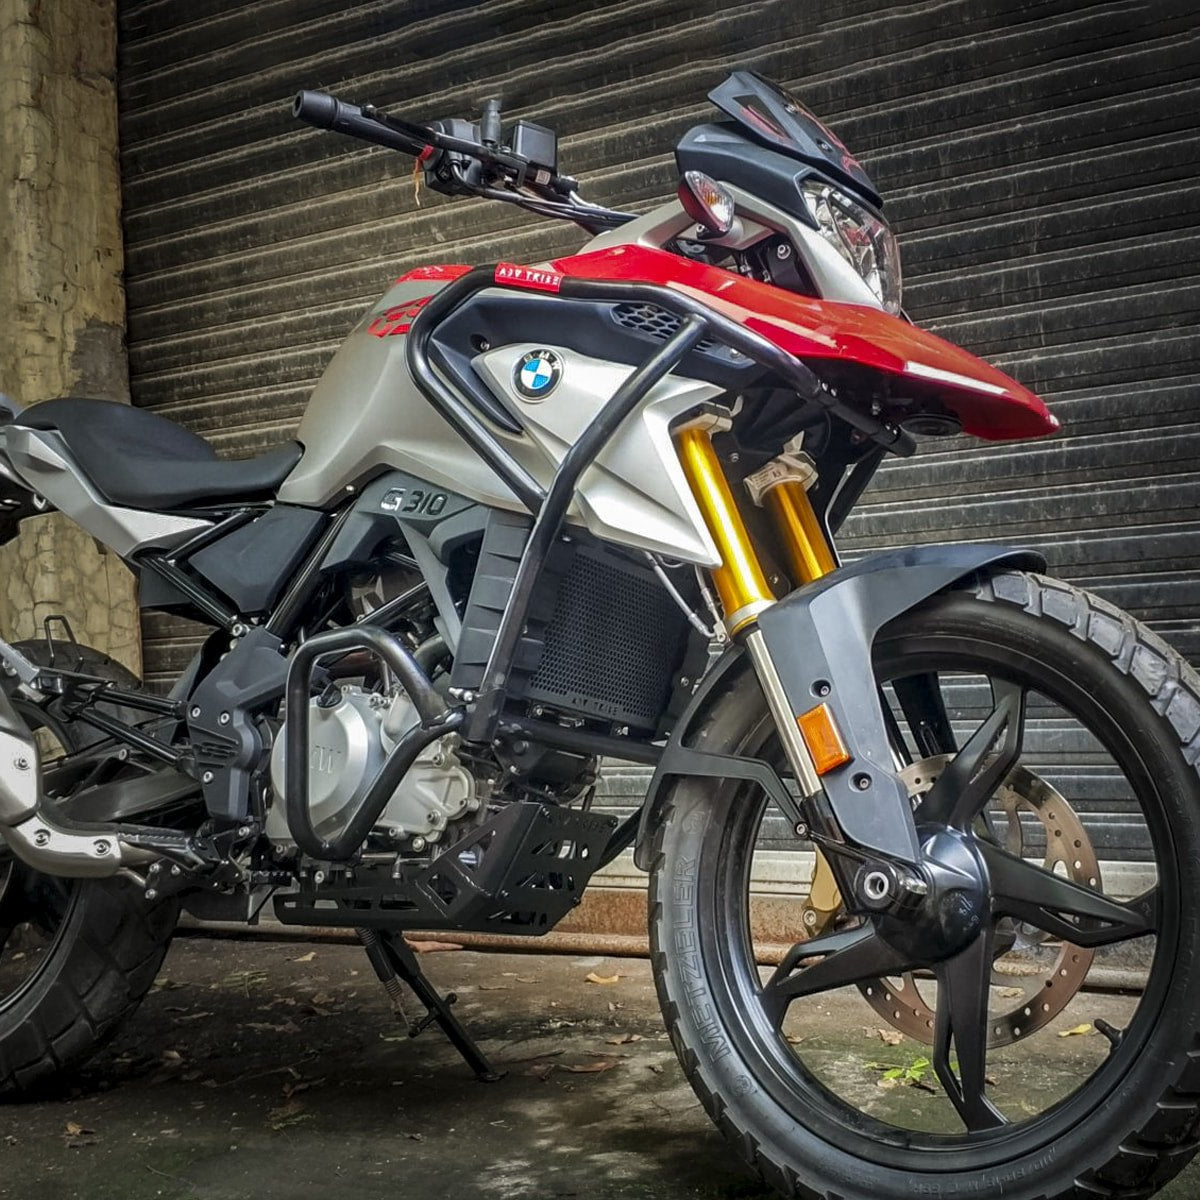 Engine Skid Plate for BMW G310GS - ADV TRIBE World